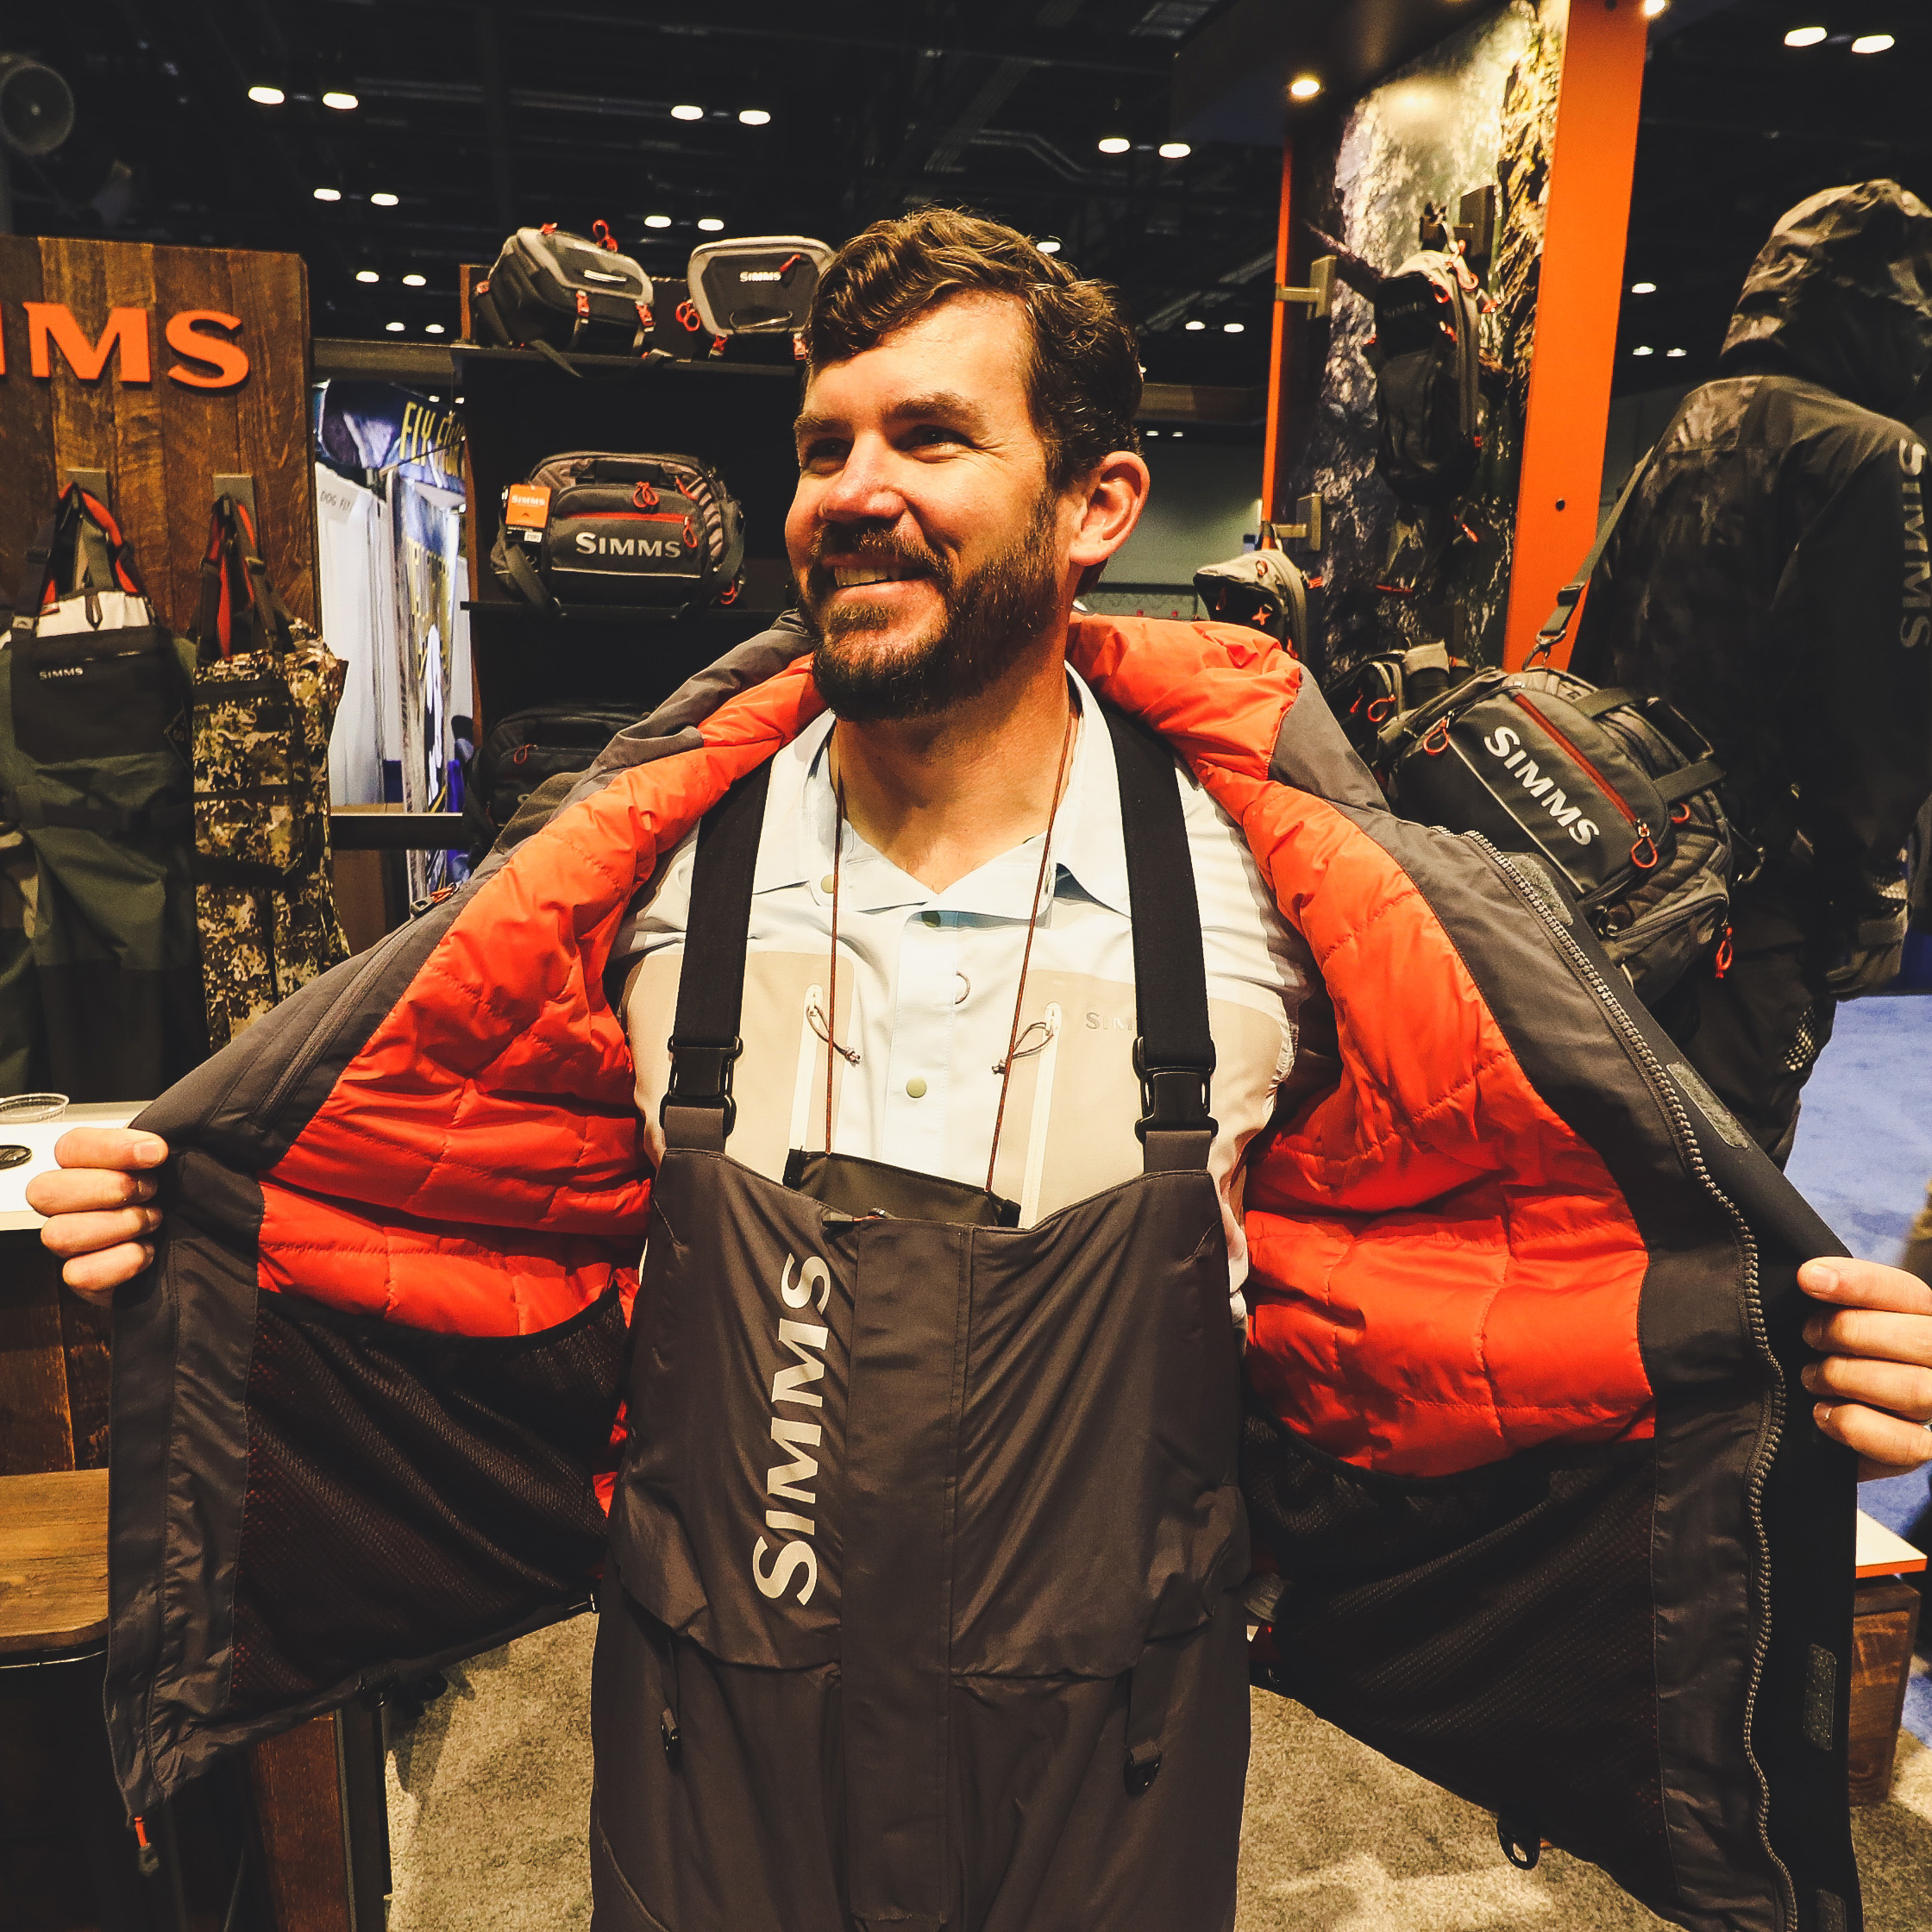 Win a SIMMS Challenger Insulated Jacket and Bib set!